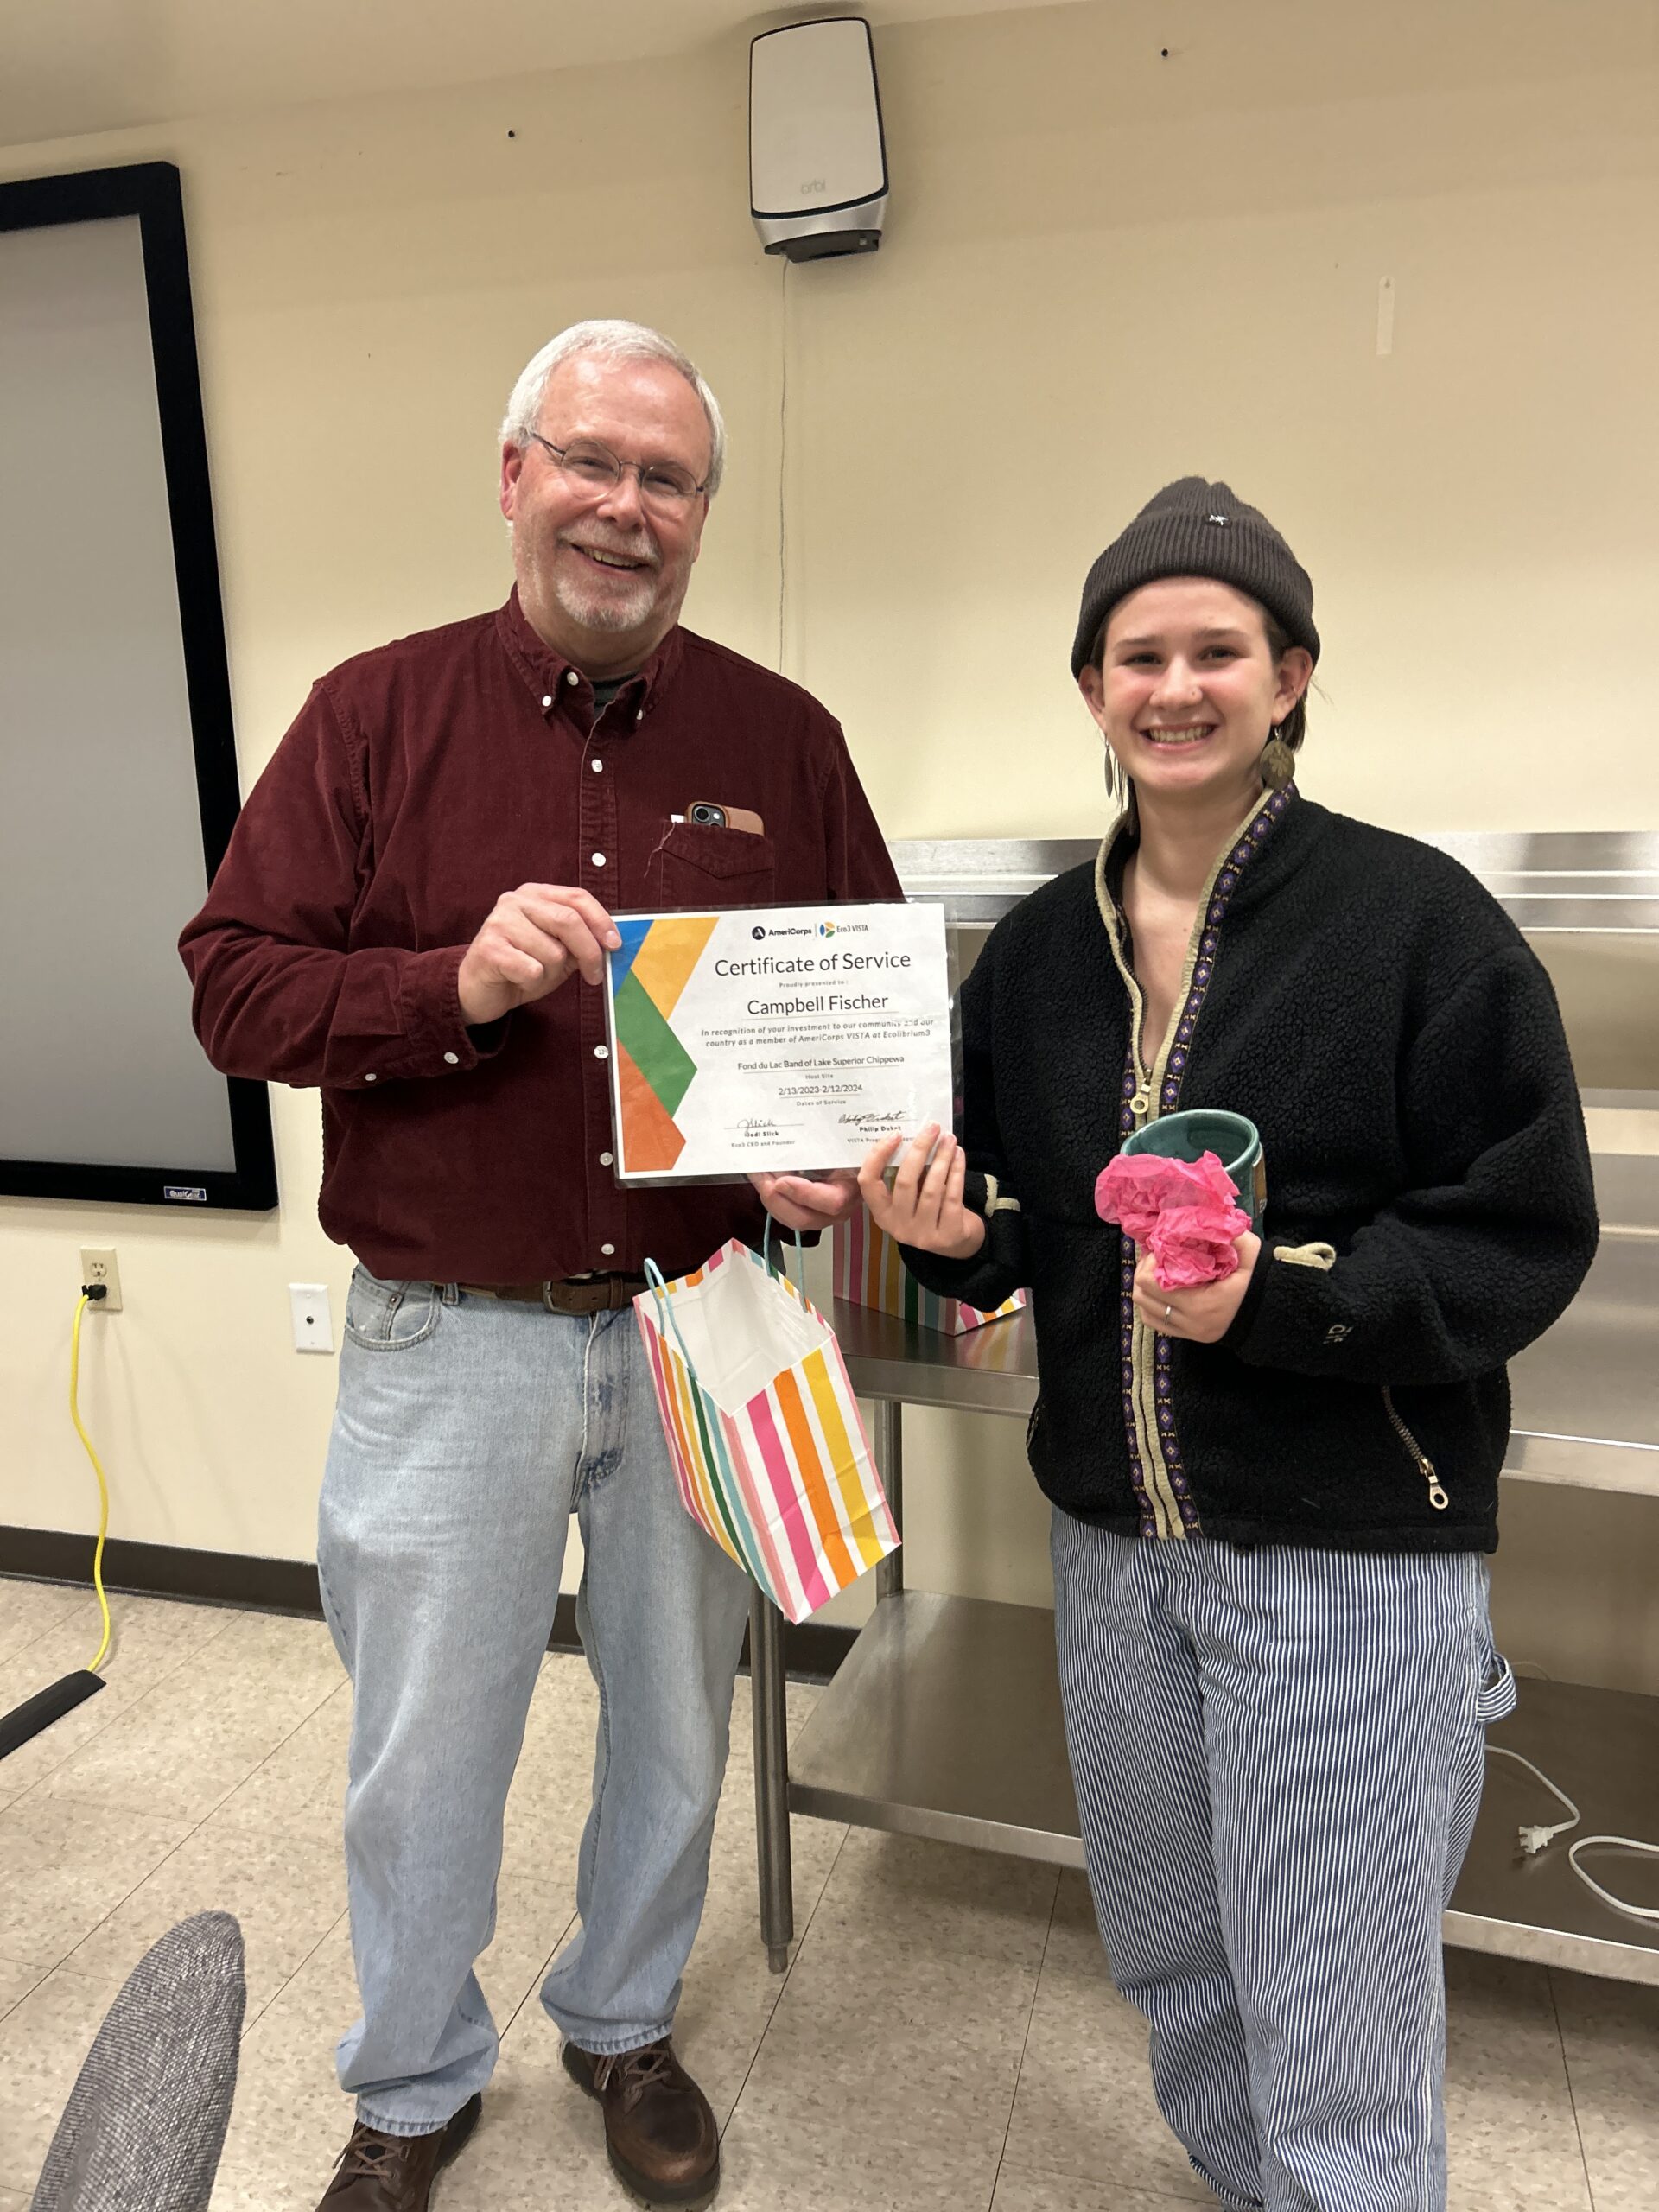 Two people smile at the camera while holding a colorful certificate between them.